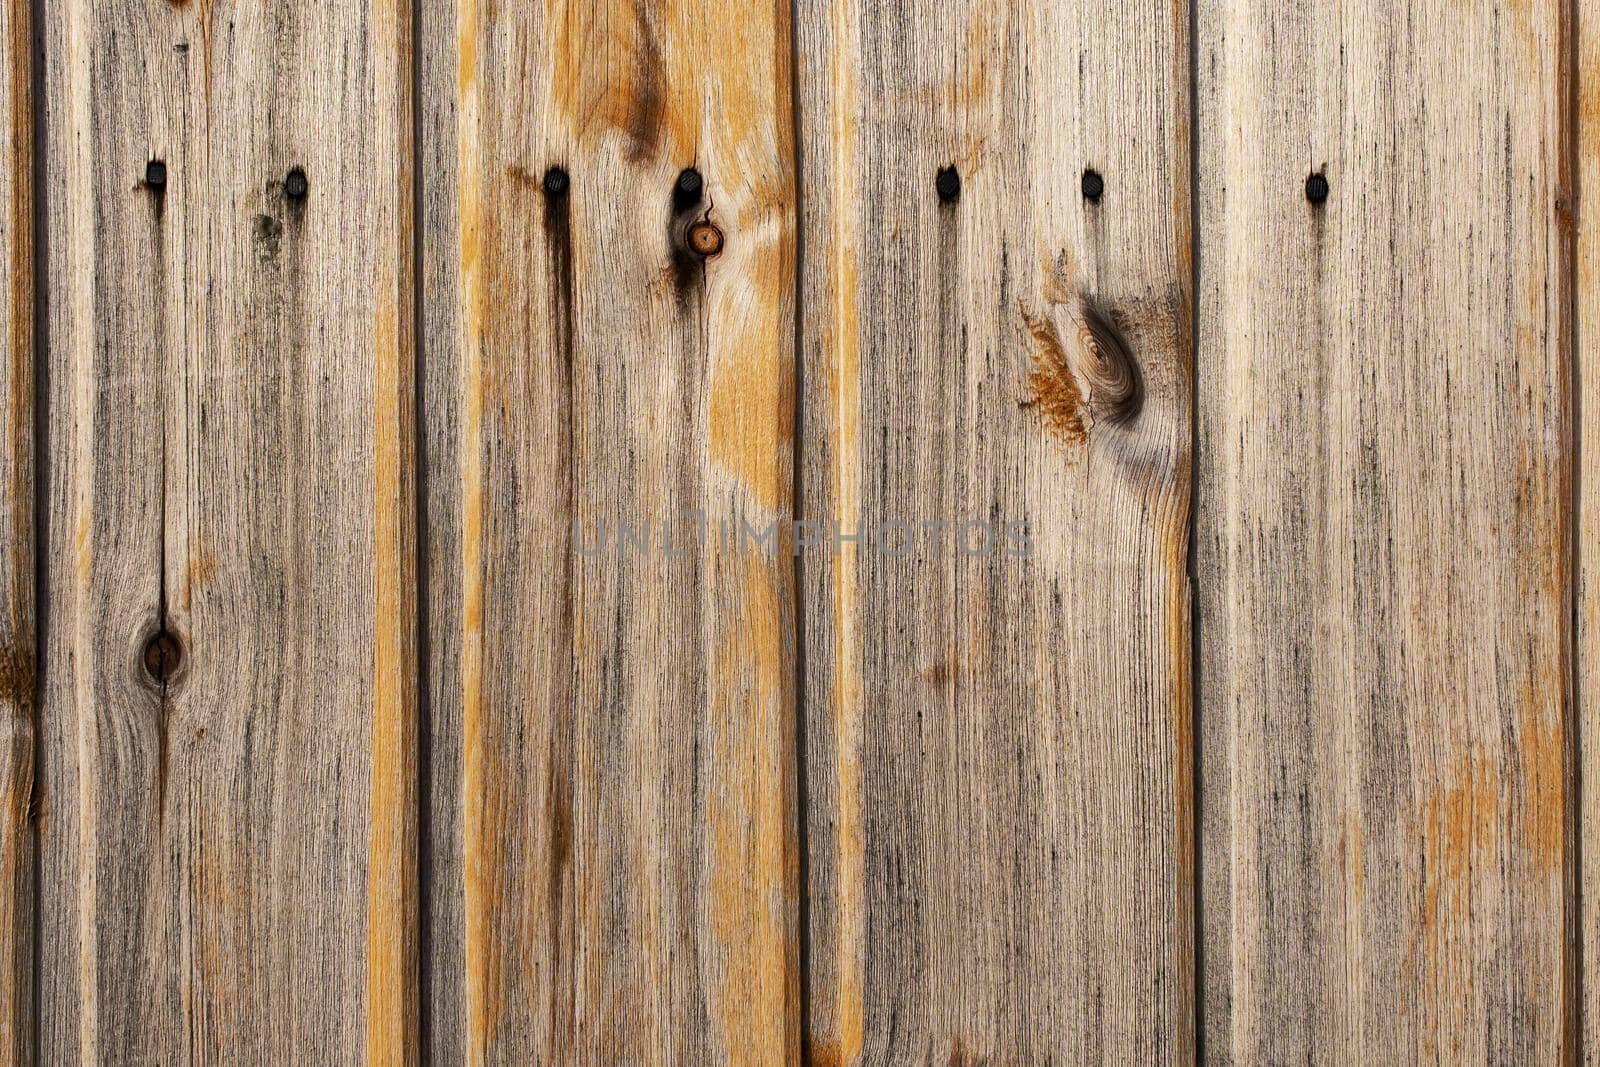 Old textures wooden peeled board with nails by Estival